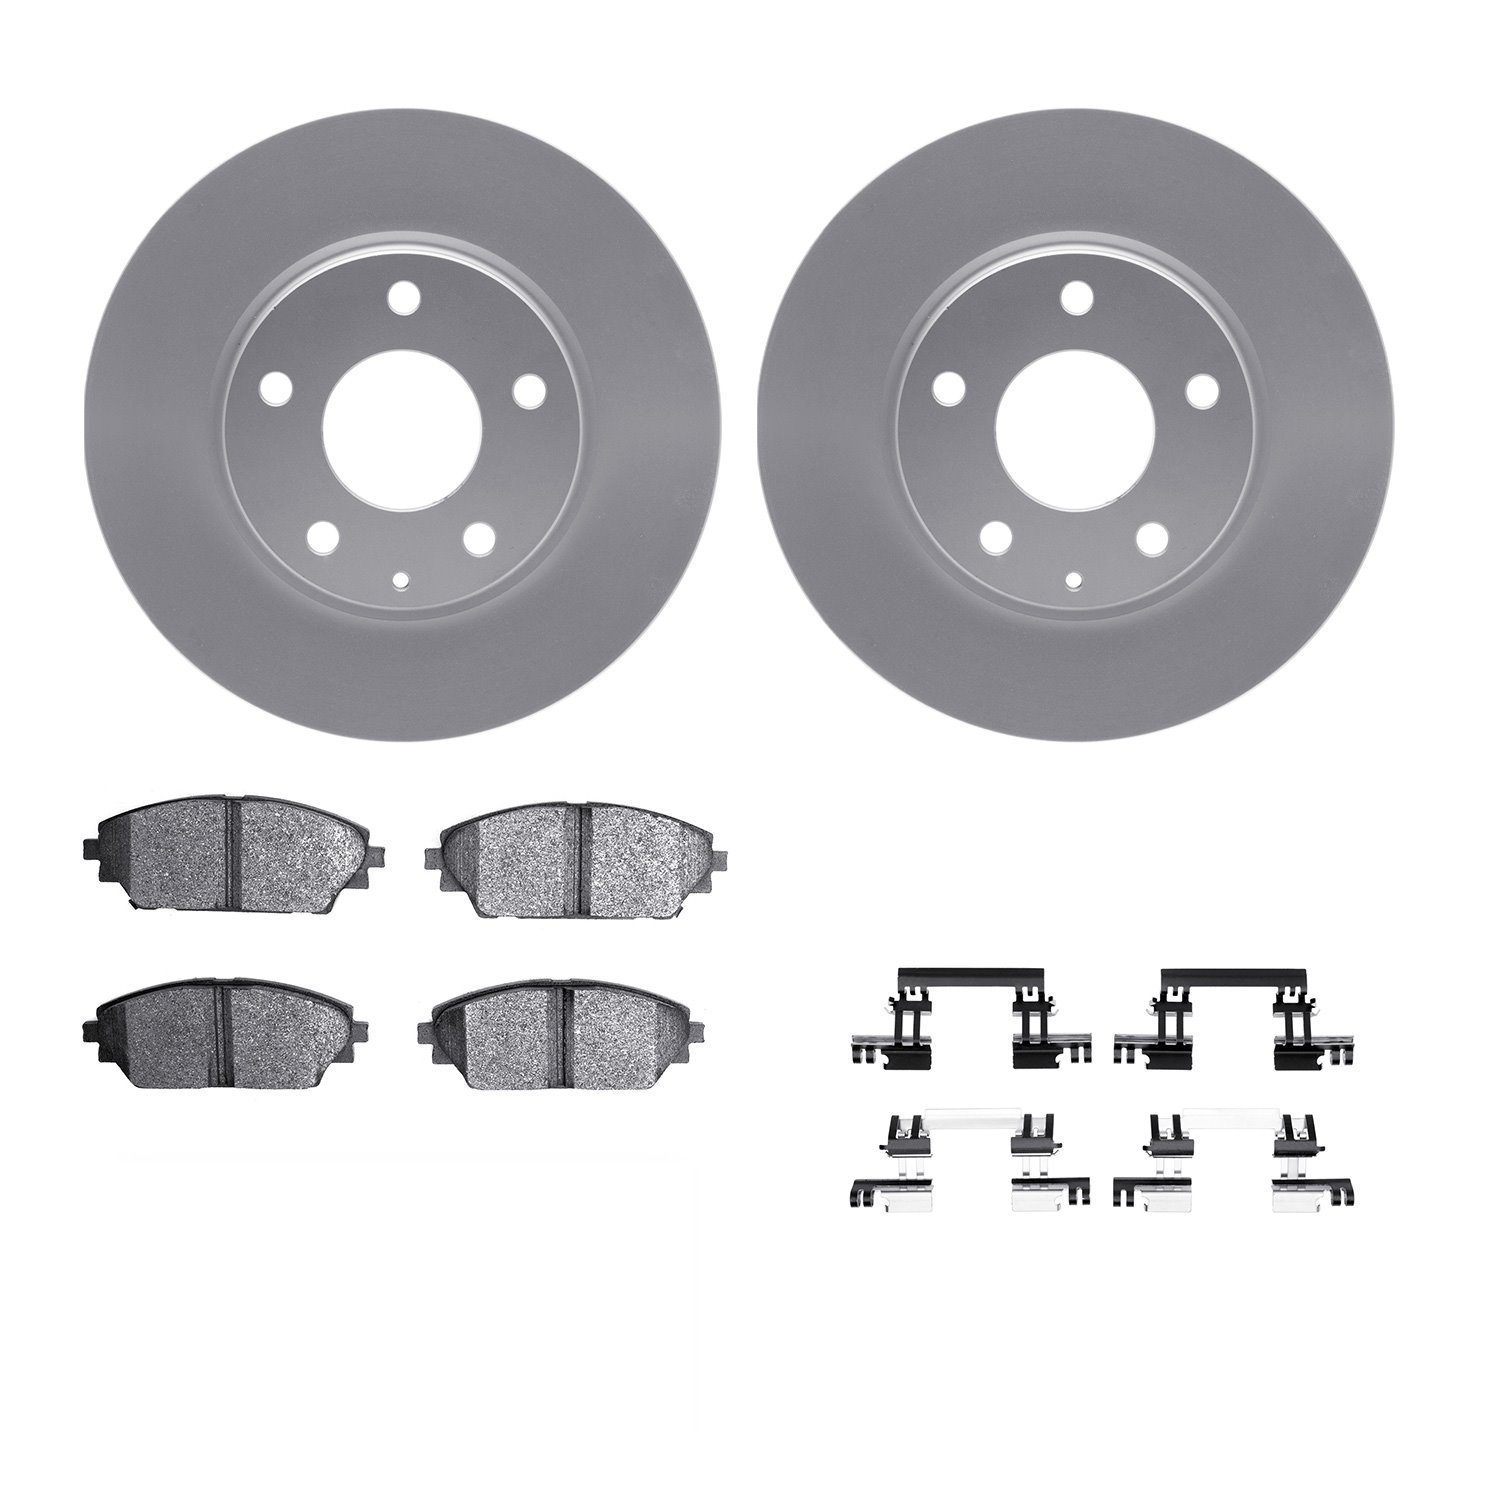 4312-80040 Geospec Brake Rotors with 3000-Series Ceramic Brake Pads & Hardware, Fits Select Ford/Lincoln/Mercury/Mazda, Position